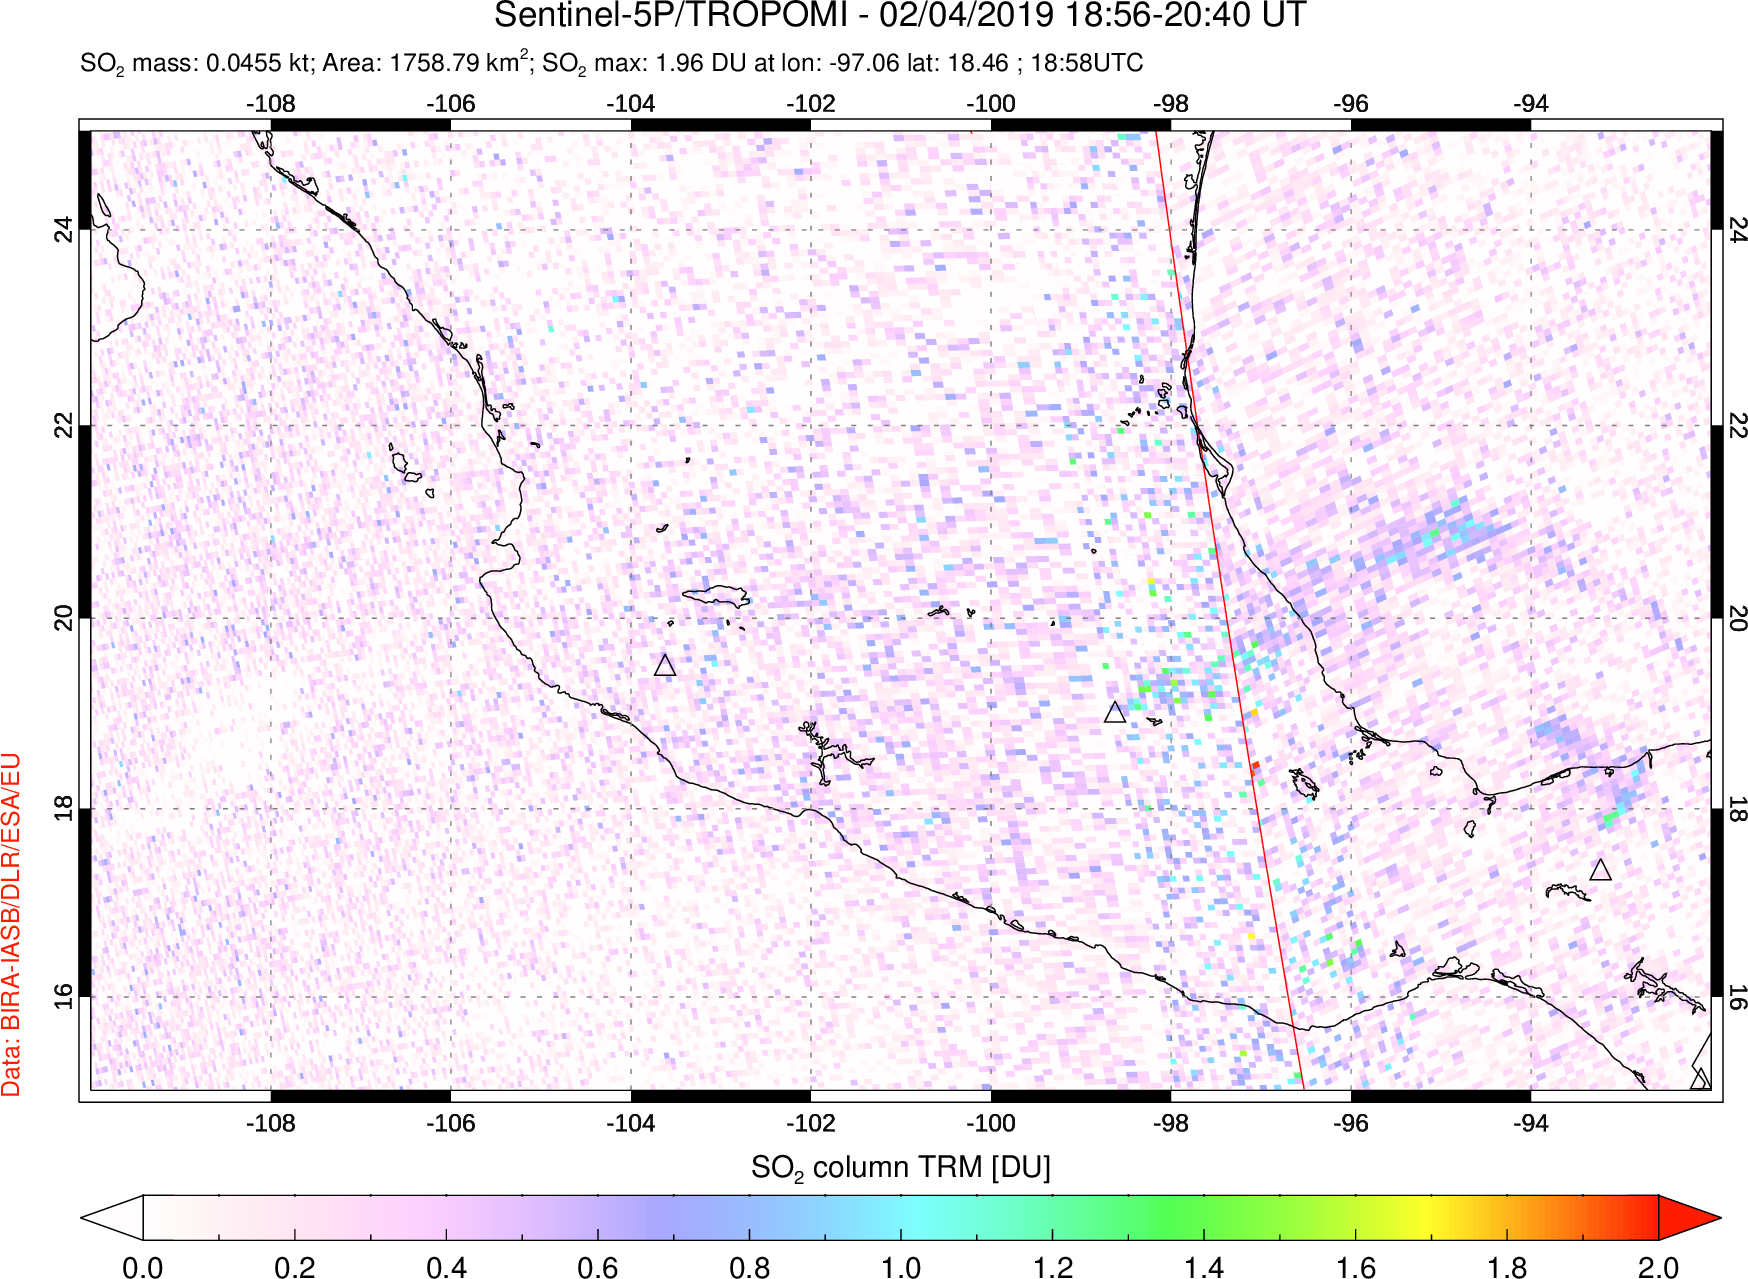 A sulfur dioxide image over Mexico on Feb 04, 2019.